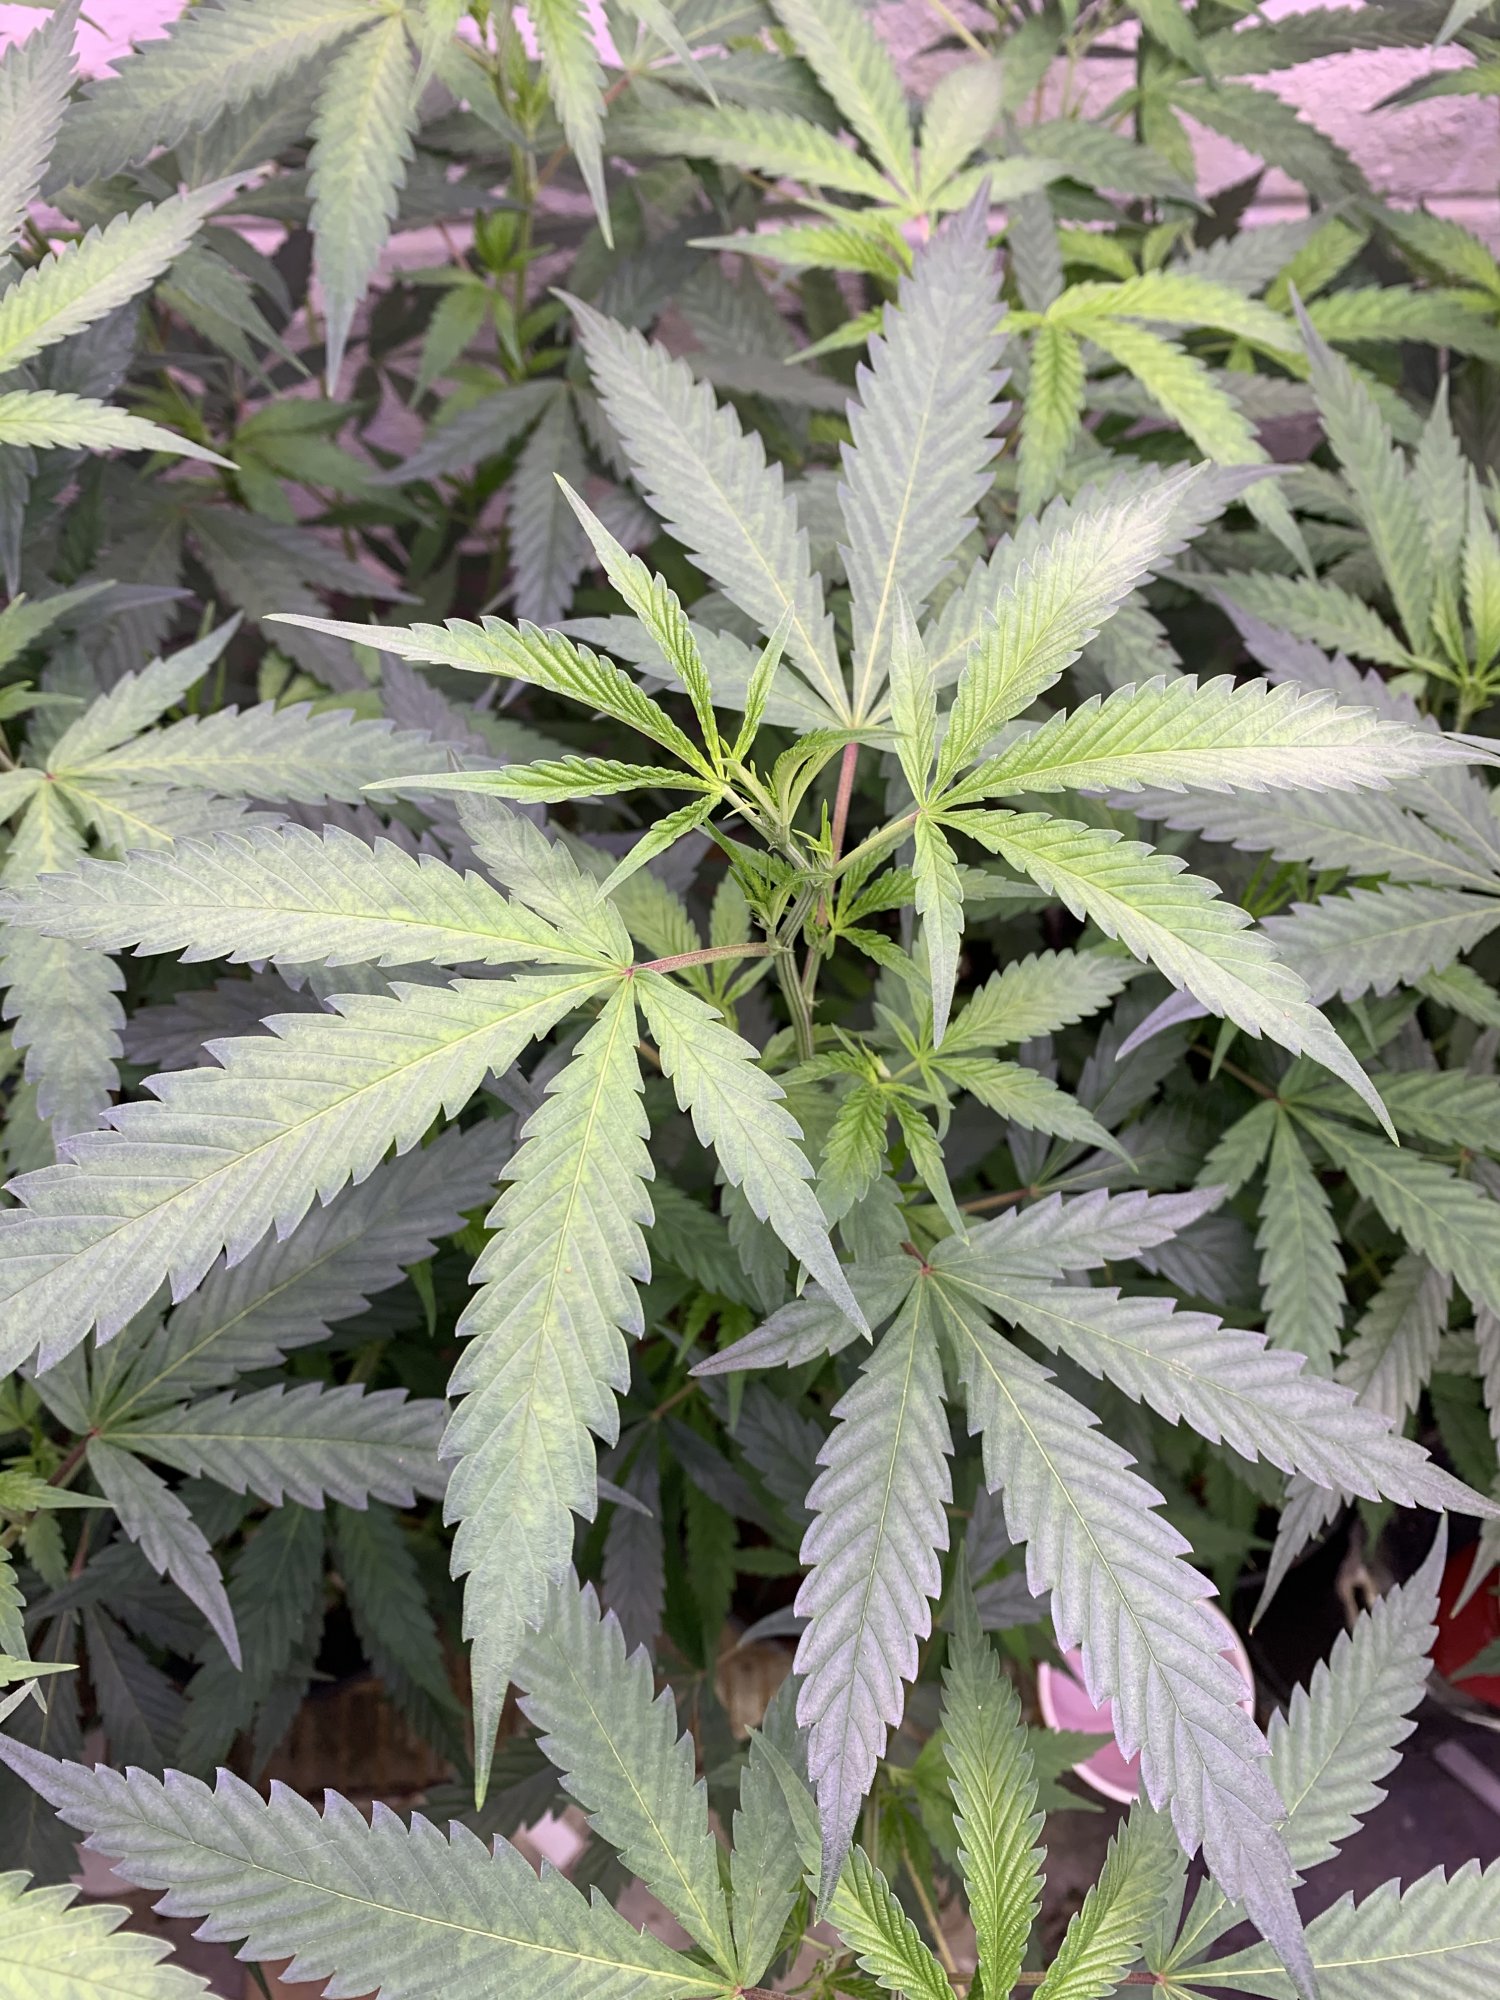 Need help with identifying deficiency and treatment 2